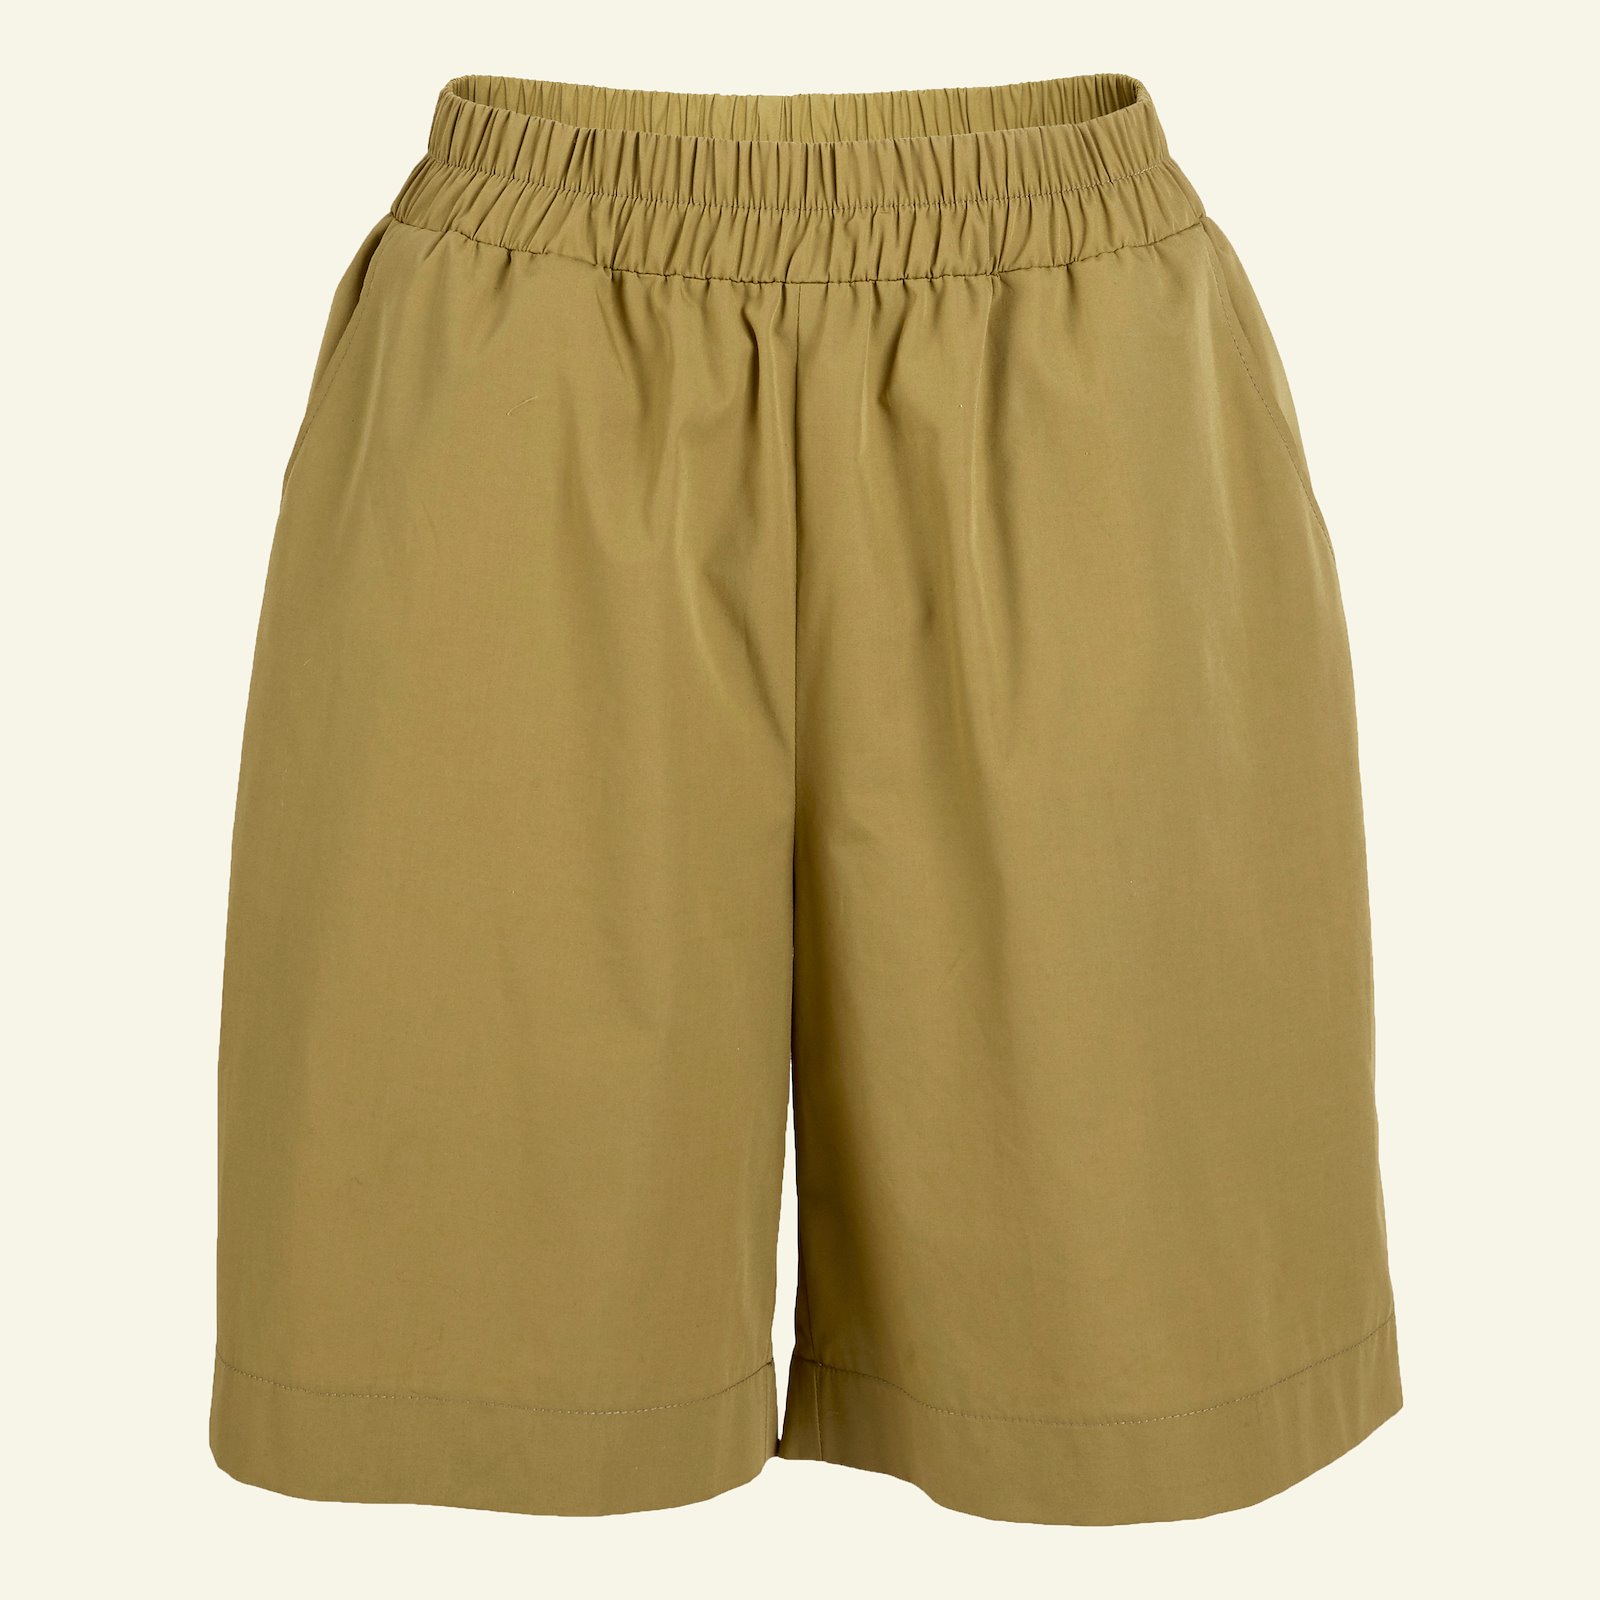 Wide trousers/shorts w. pockets, 34/6 p20051_501926_sskit